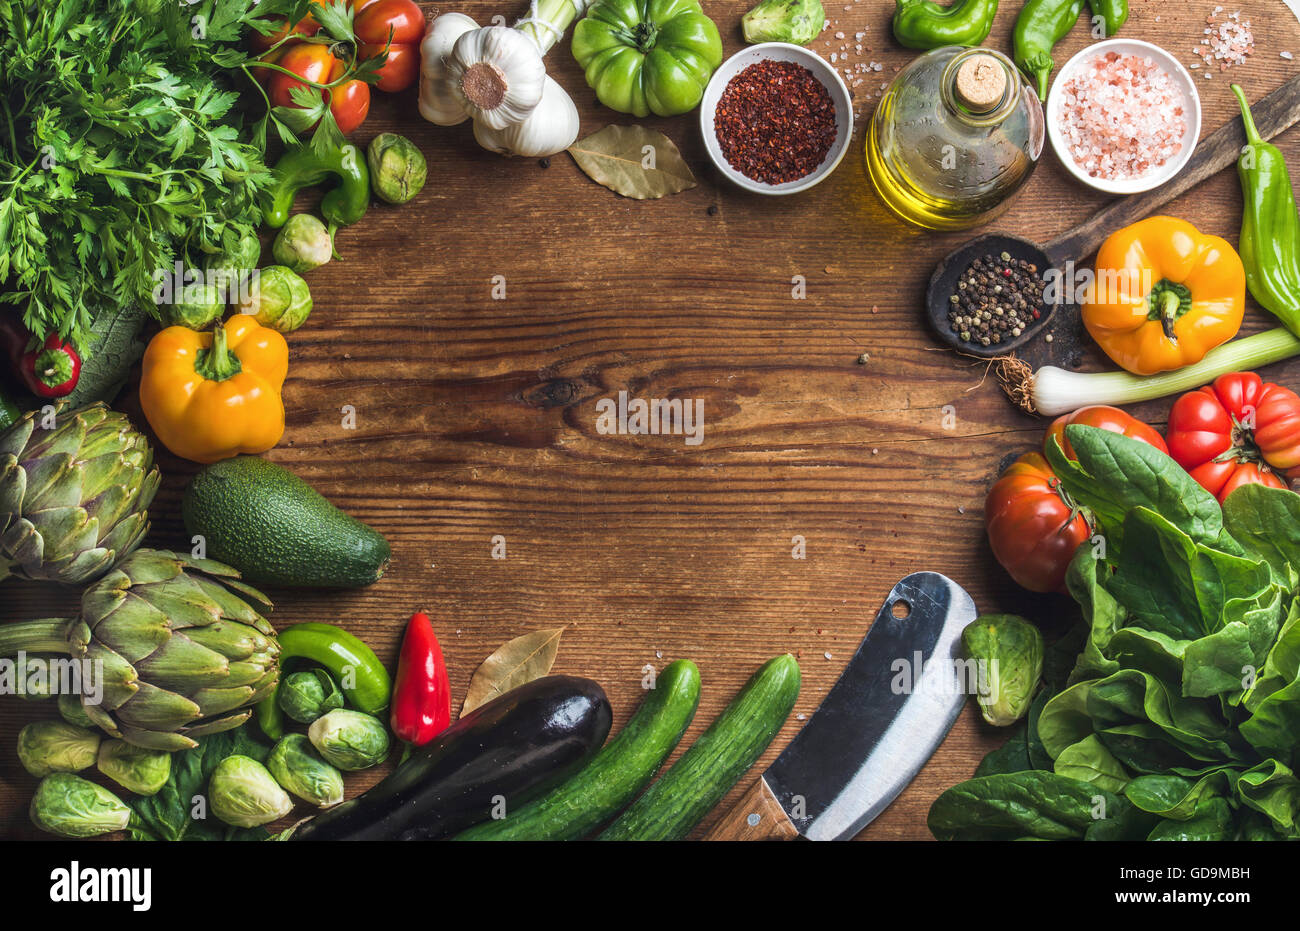 Ingredients for cooking healthy vegetarian cooking. Variery of vegetables, spices, herbs and olive oil over wooden background, t Stock Photo